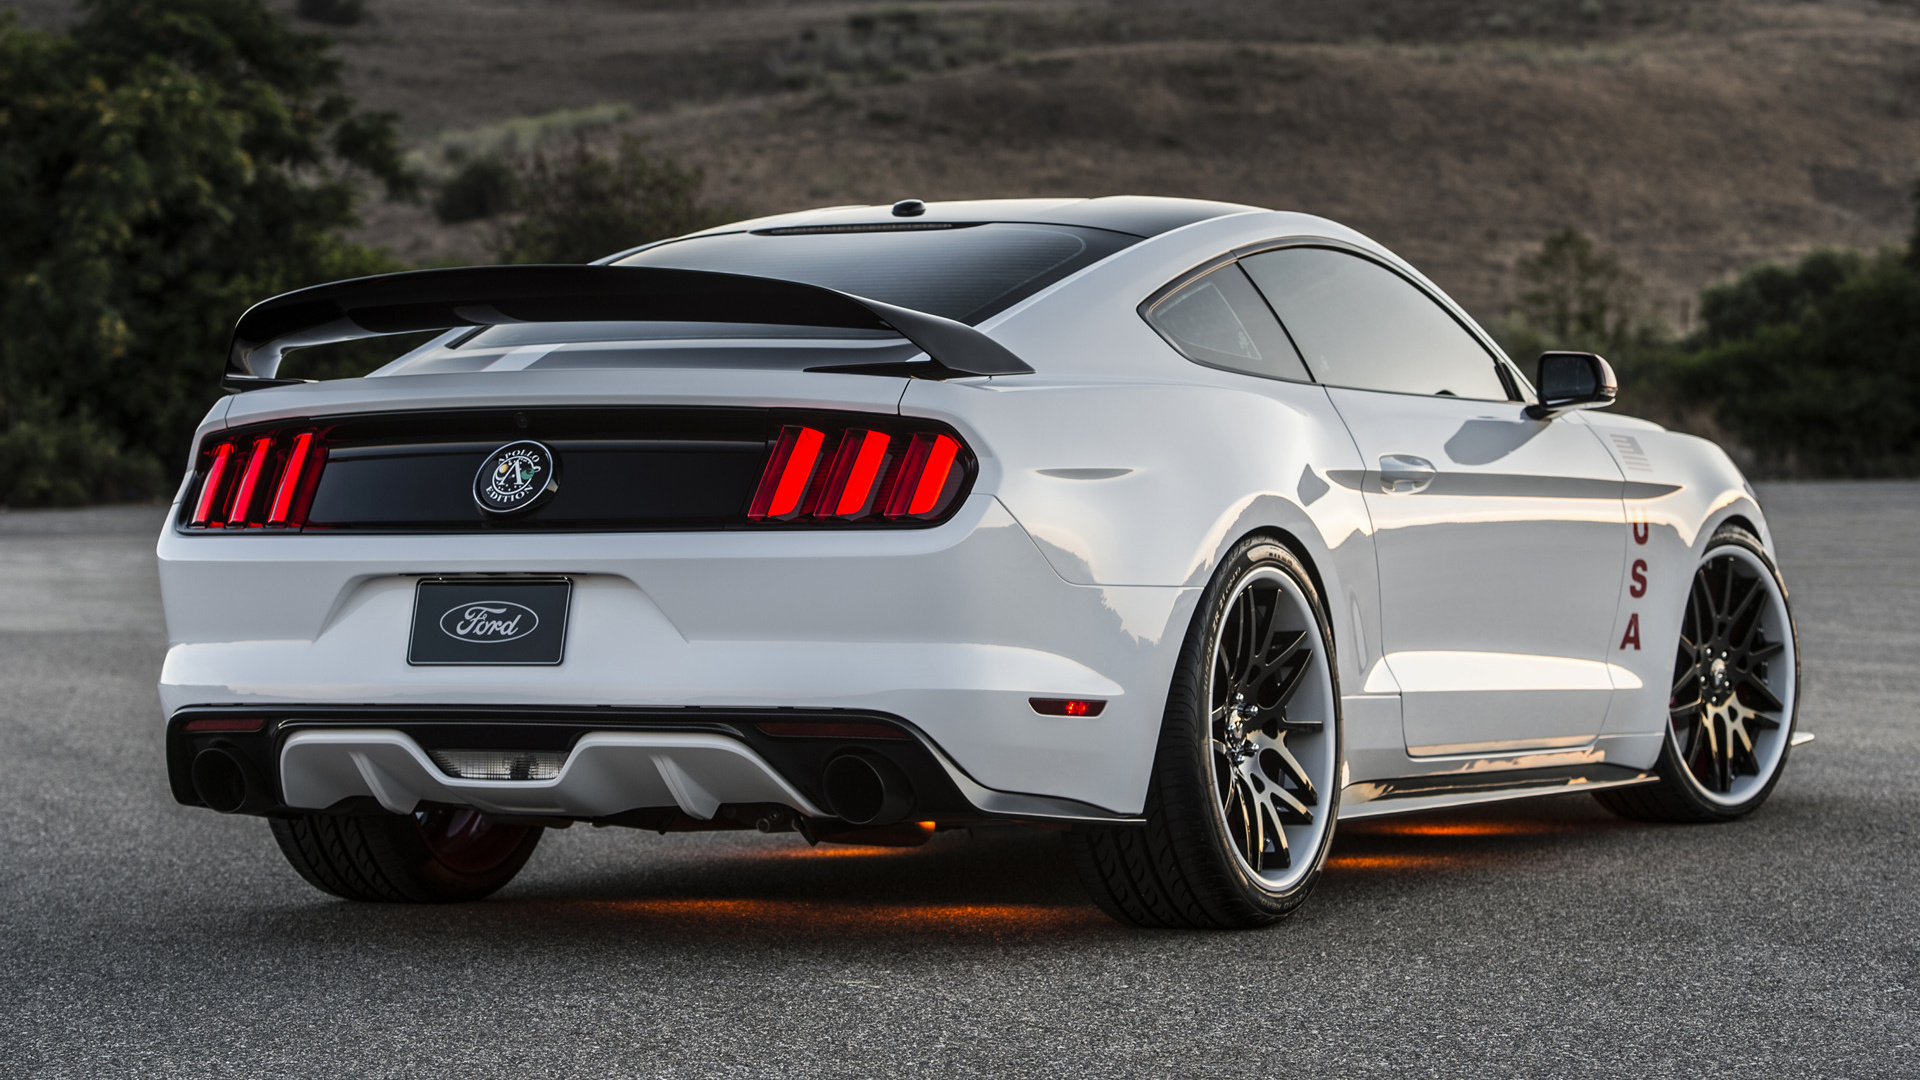 Car Coupe Ford Mustang Apollo Edition Muscle Car White Car 1920x1080